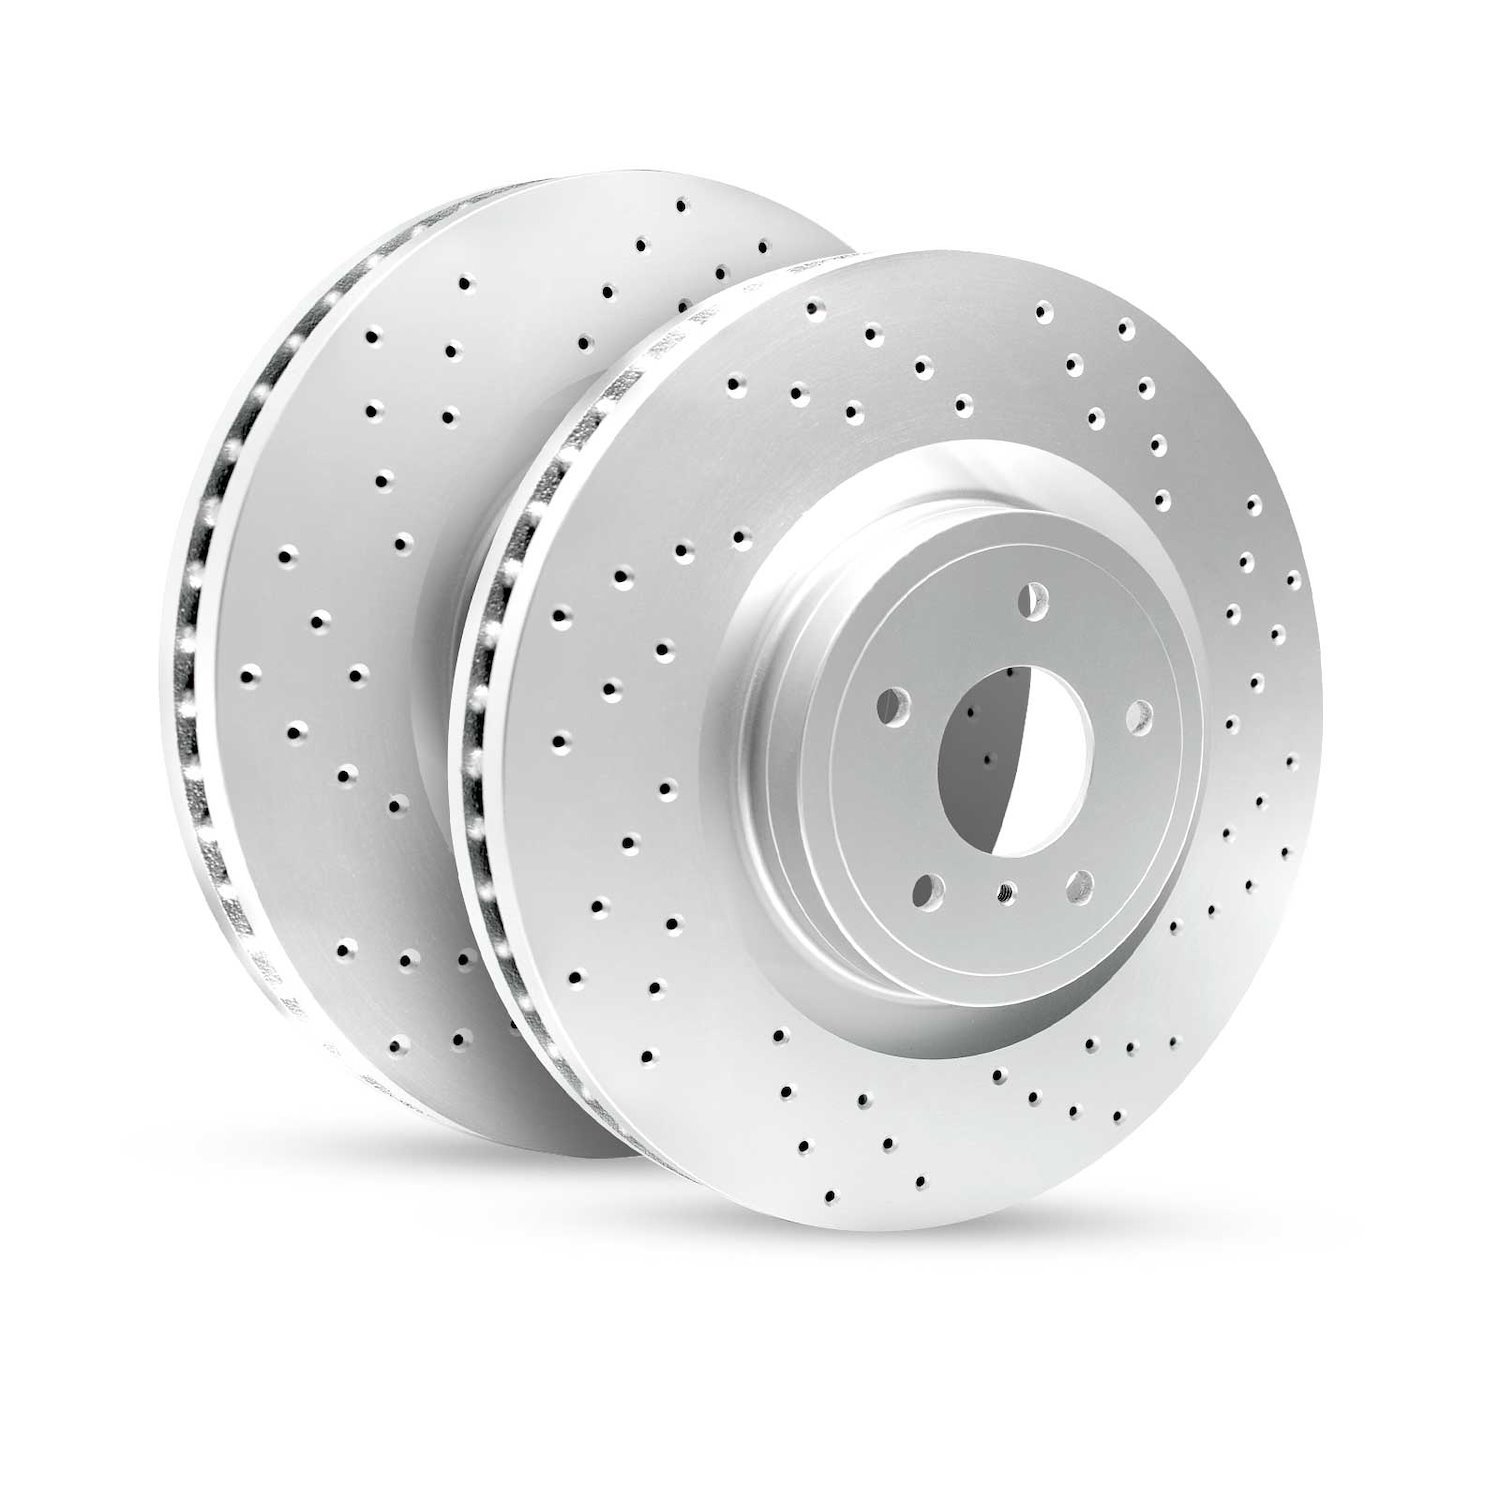 GEO-Carbon Drilled/Slotted Rotors, 2005-2020 Fits Multiple